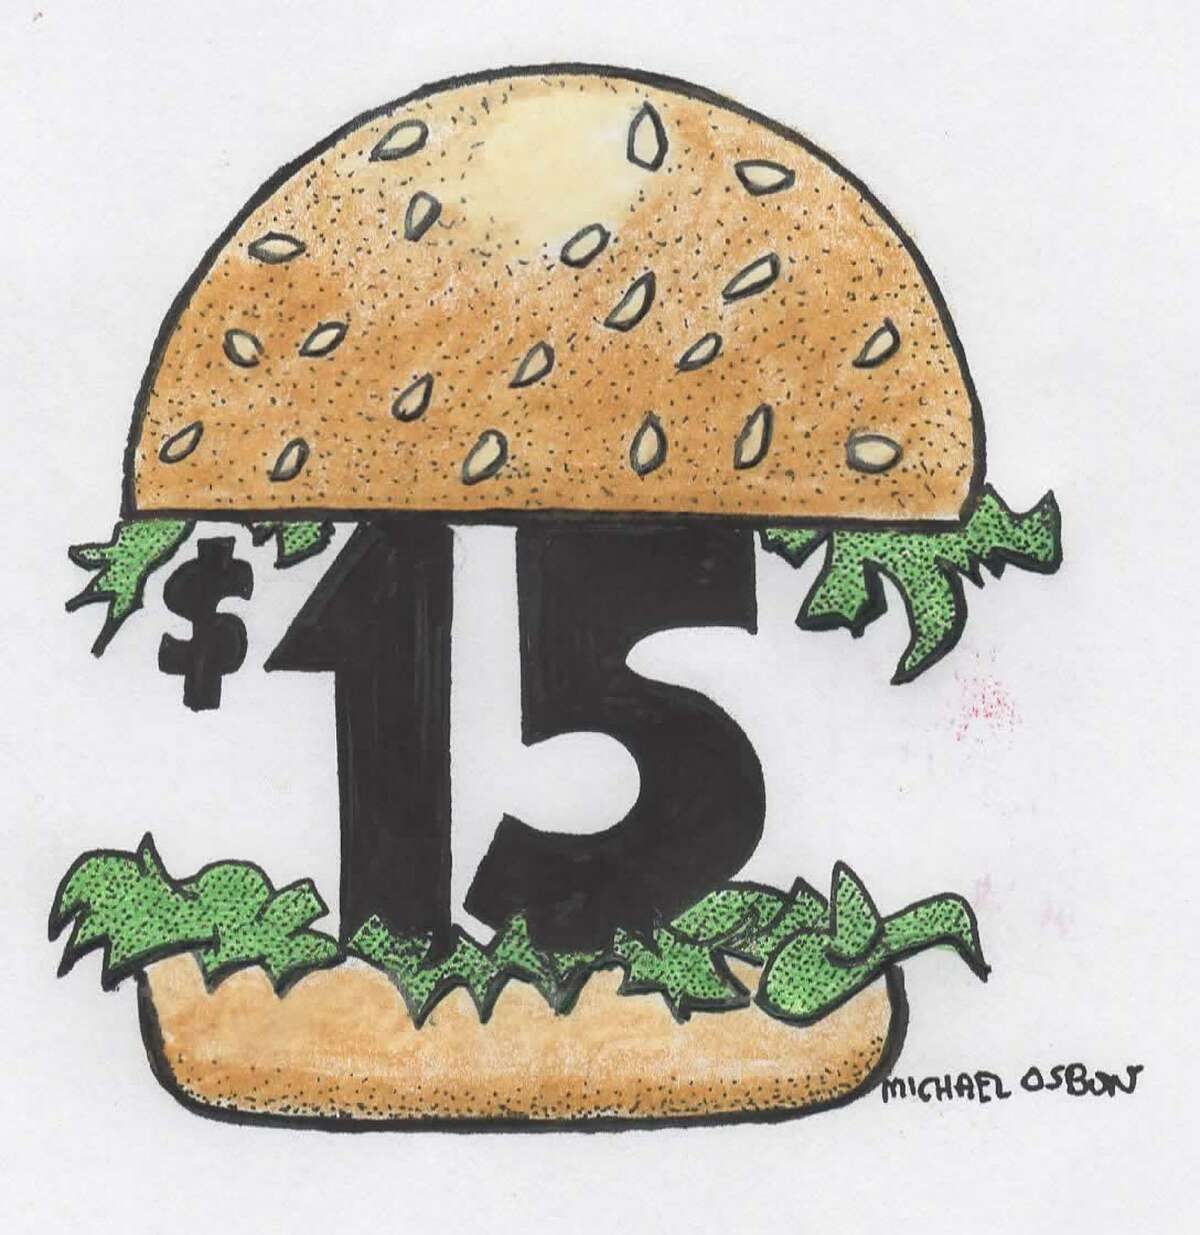 This artwork by Michael Osbun refers to raising the minimum wage to $15/hour.